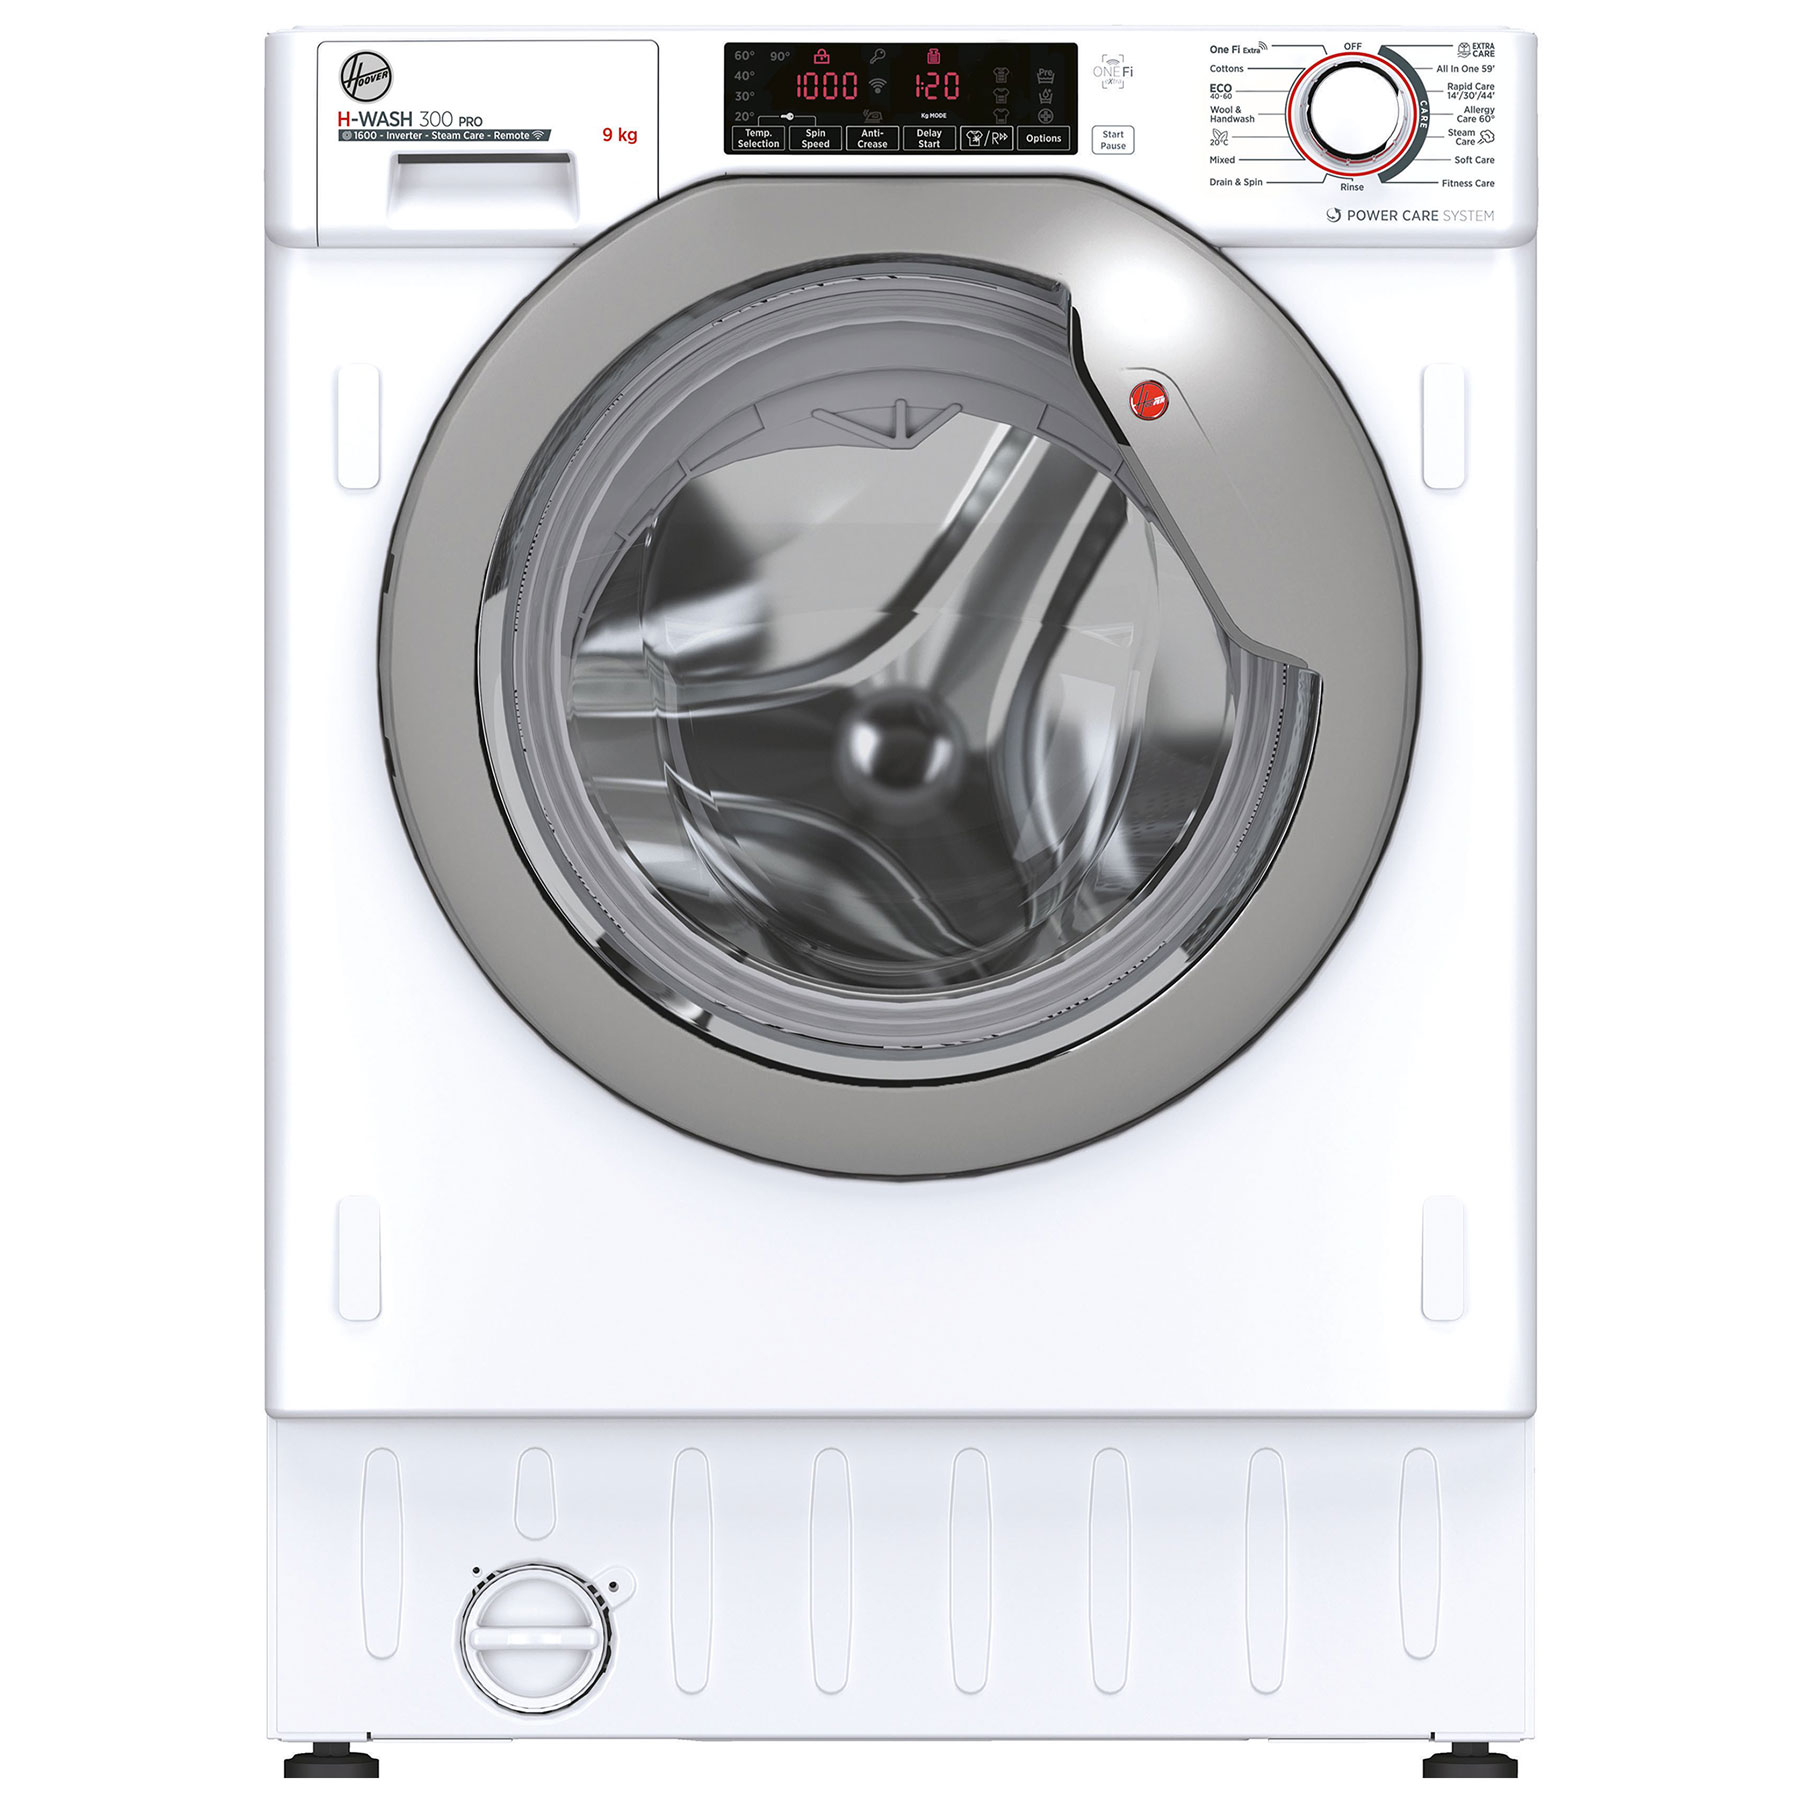 Hoover HBWOS69TAMSE Integrated Washing Machine 1600rpm 9kg A Rated